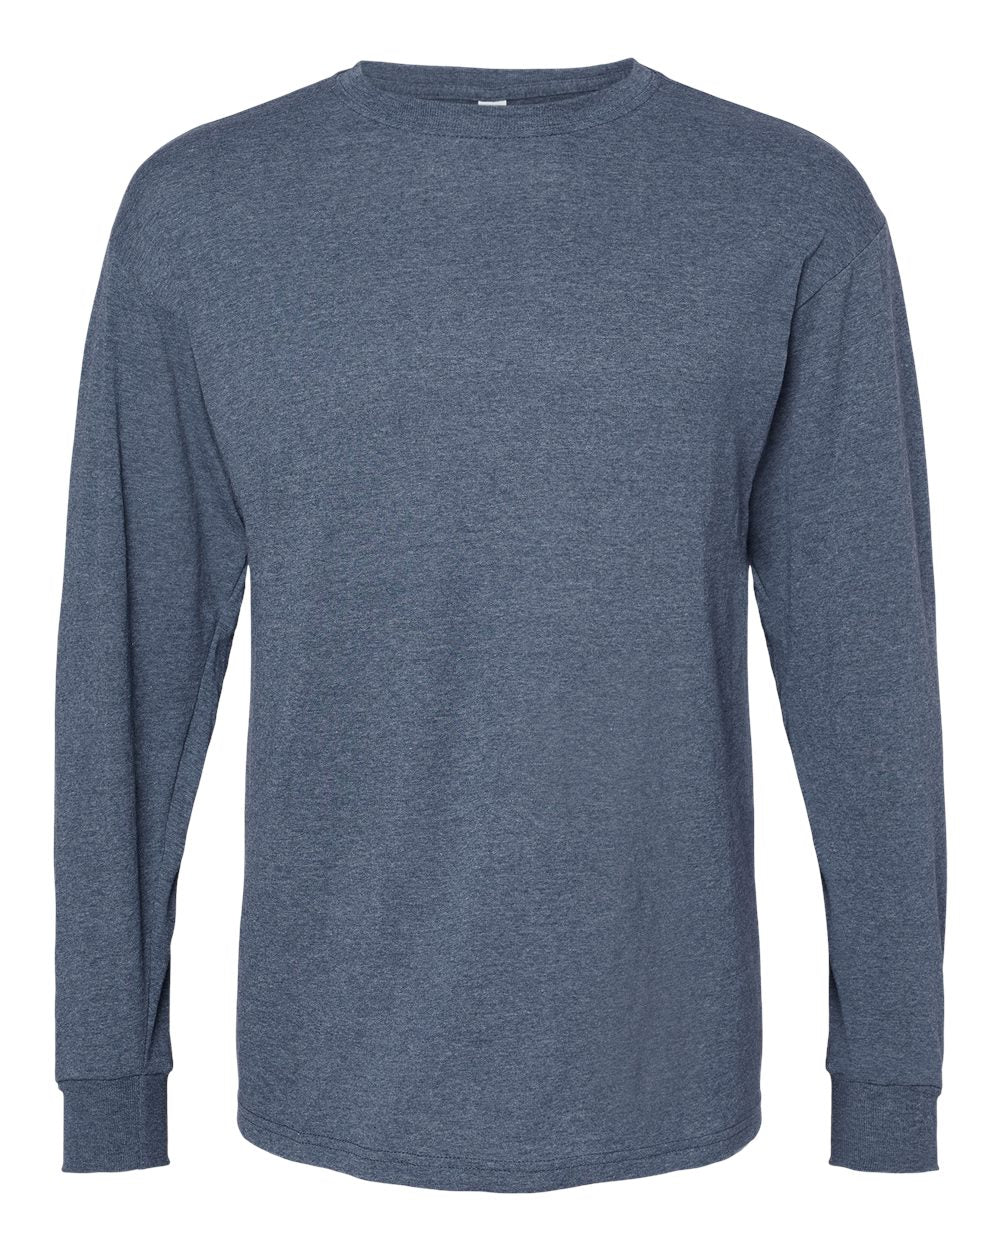 M&O Gold Soft Touch Long Sleeve T-Shirt 4820 #color_Heather Navy